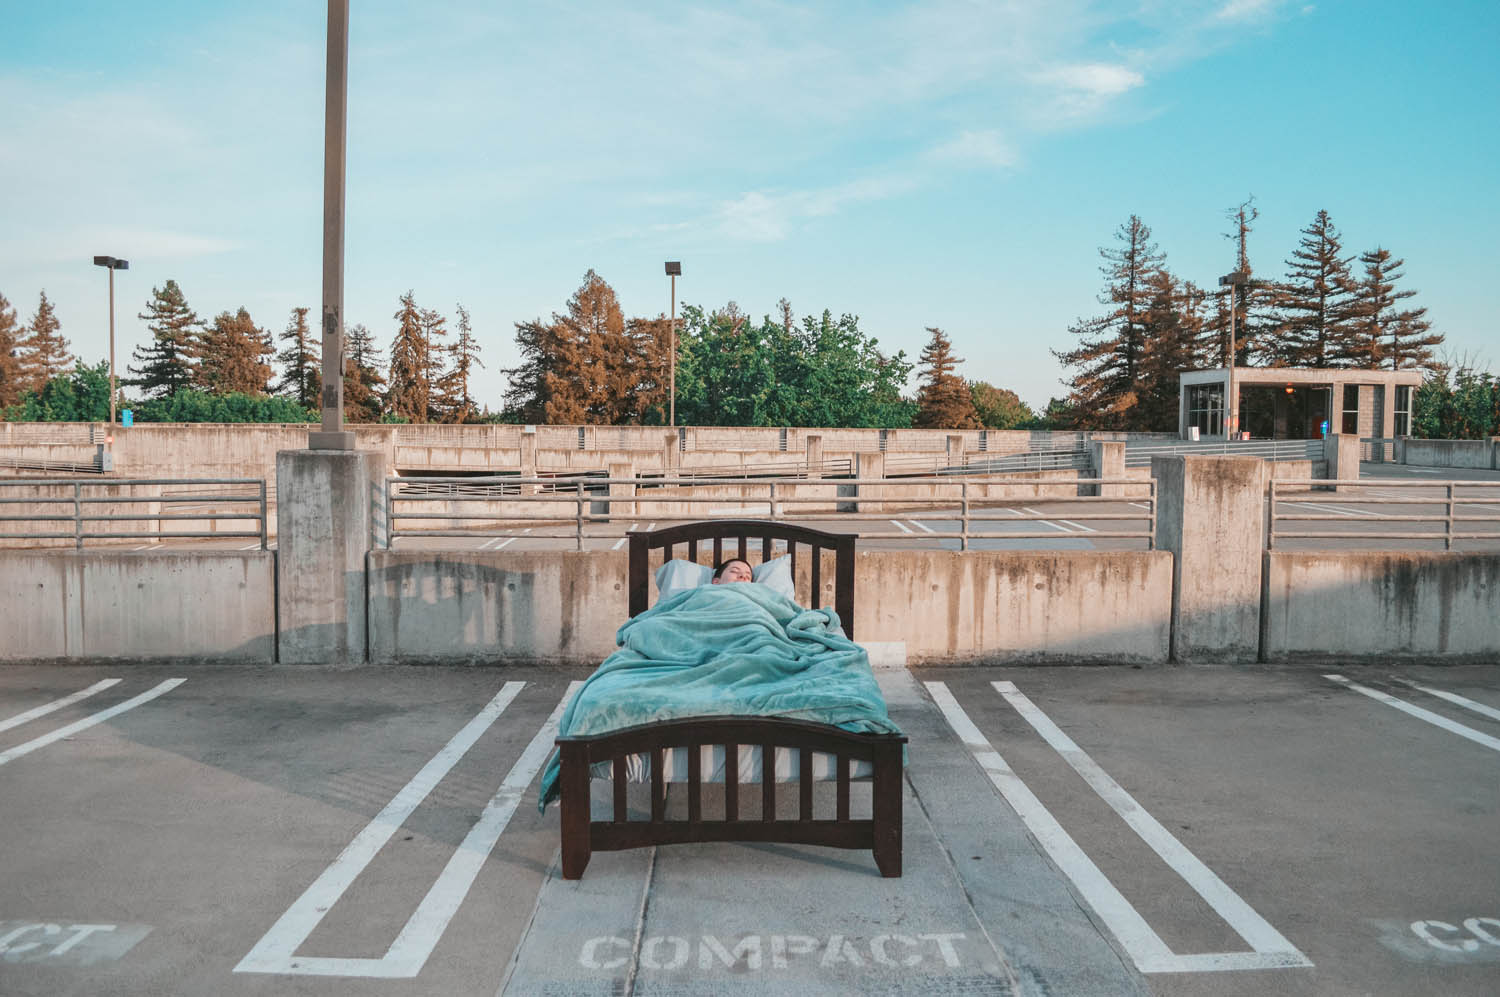 A close up photo of a bed in an empty parking lot. There is a person sleeping in the bed. The photo is looking at the foot of the bed.